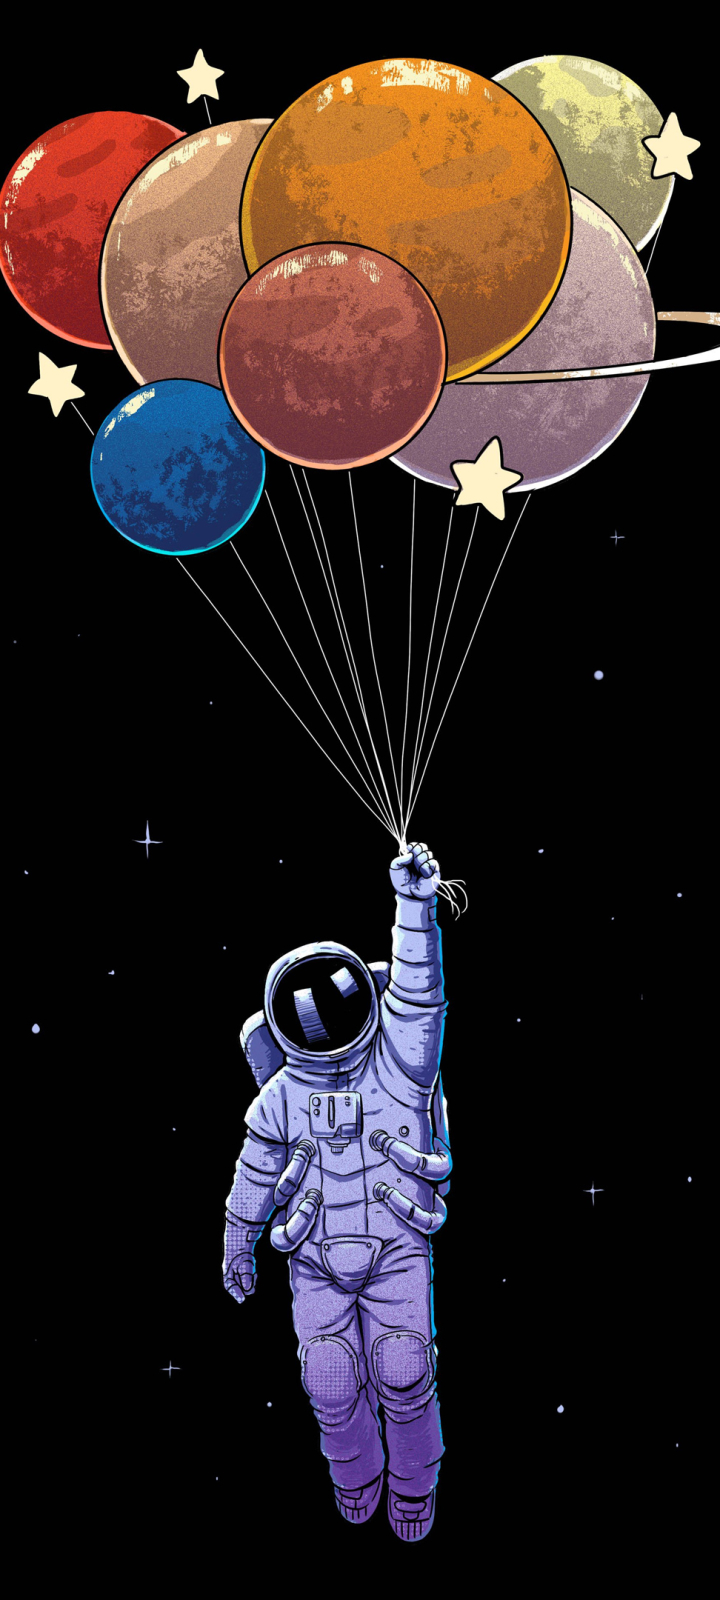 android sci fi, astronaut, spacesuit, balloon